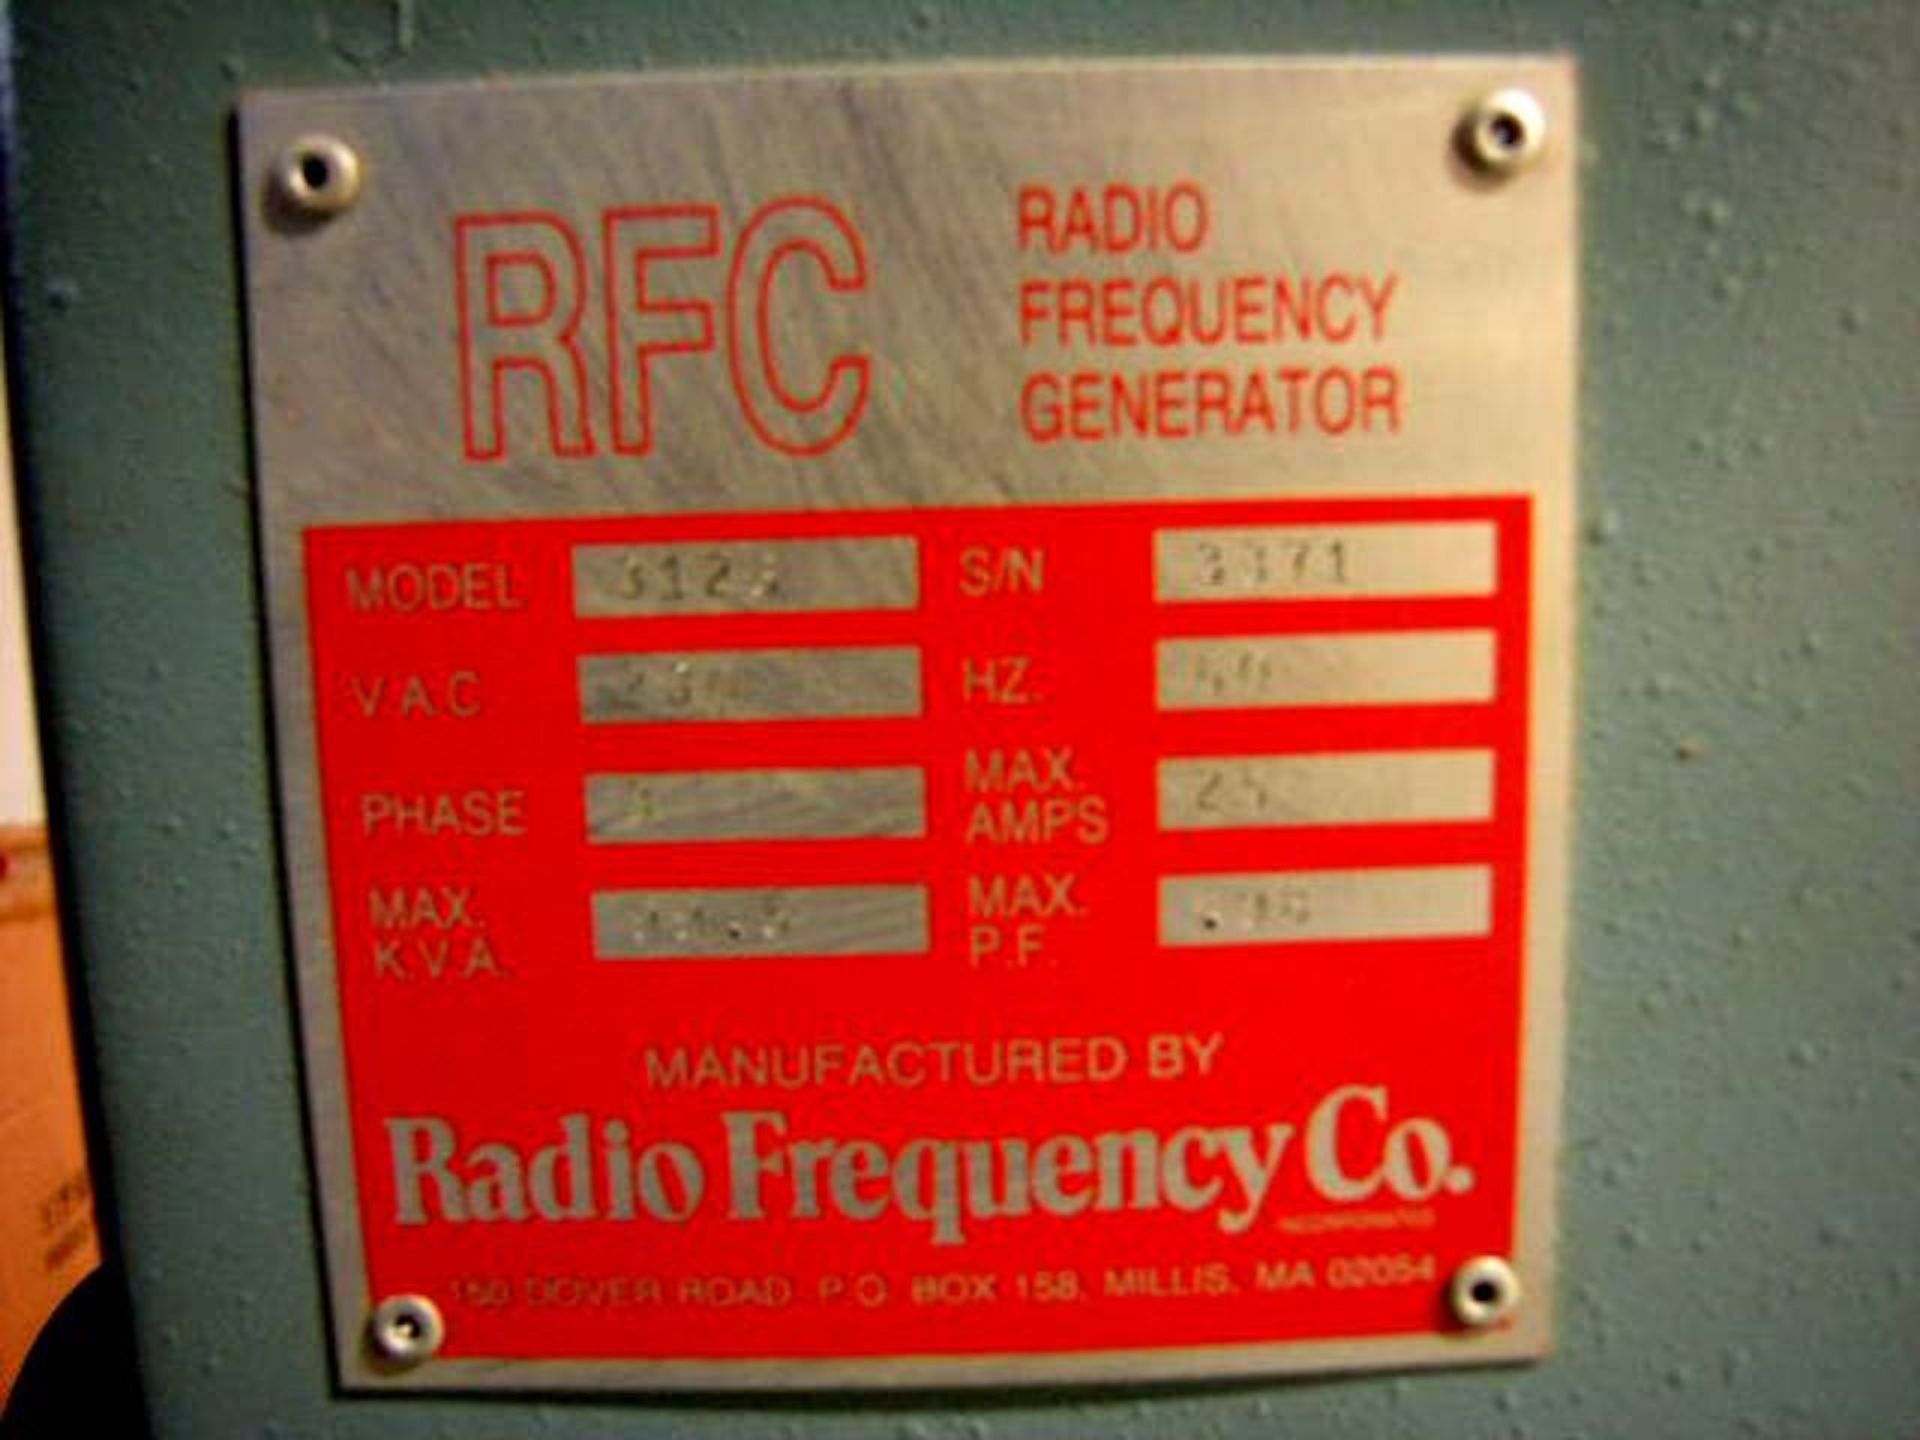 RADIO FREQUENCY CO. INDUCTION GENERATOR SYSTEM RFC, Radio Frequency Generator Md. 3126 Max. kva: - Image 4 of 14